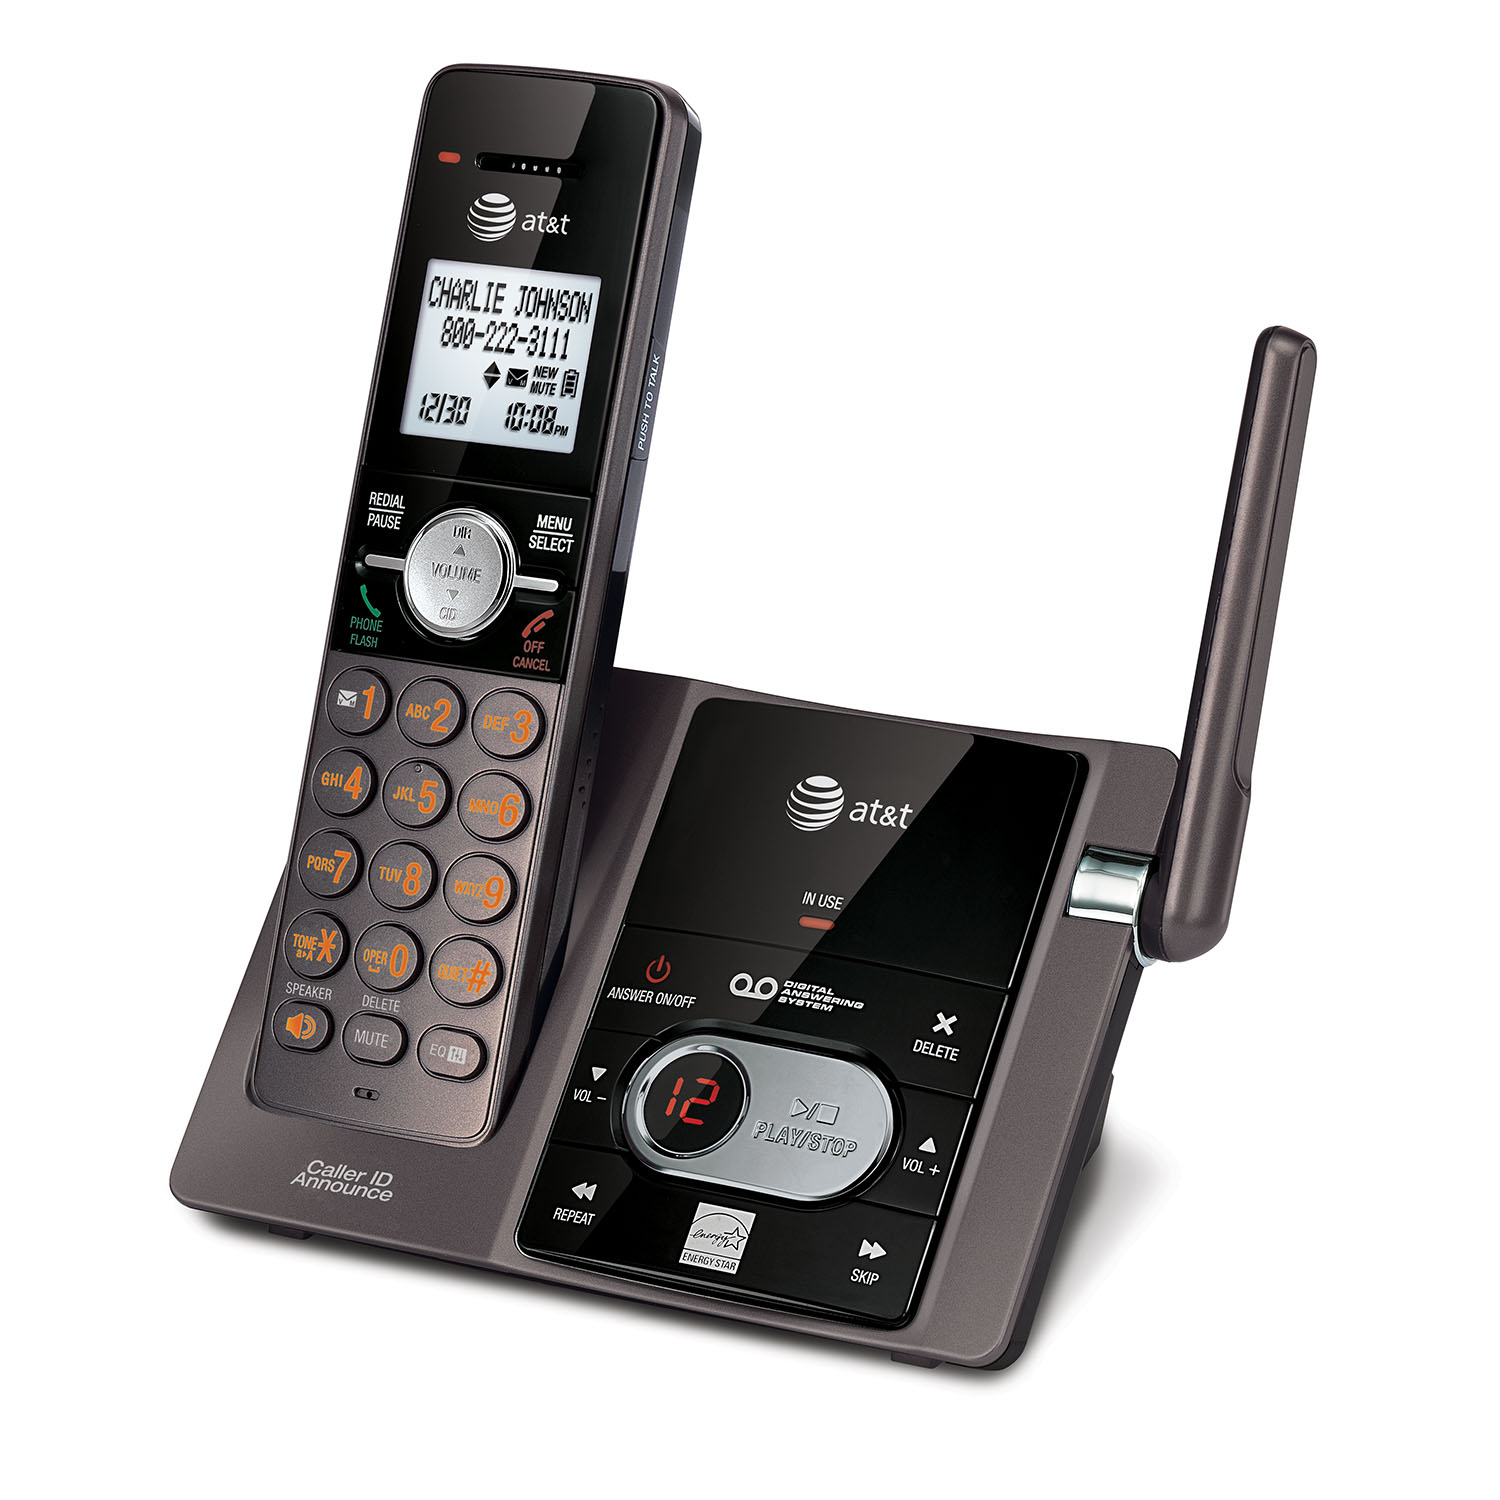 5 handset cordless answering system with caller ID/call waiting - view 2